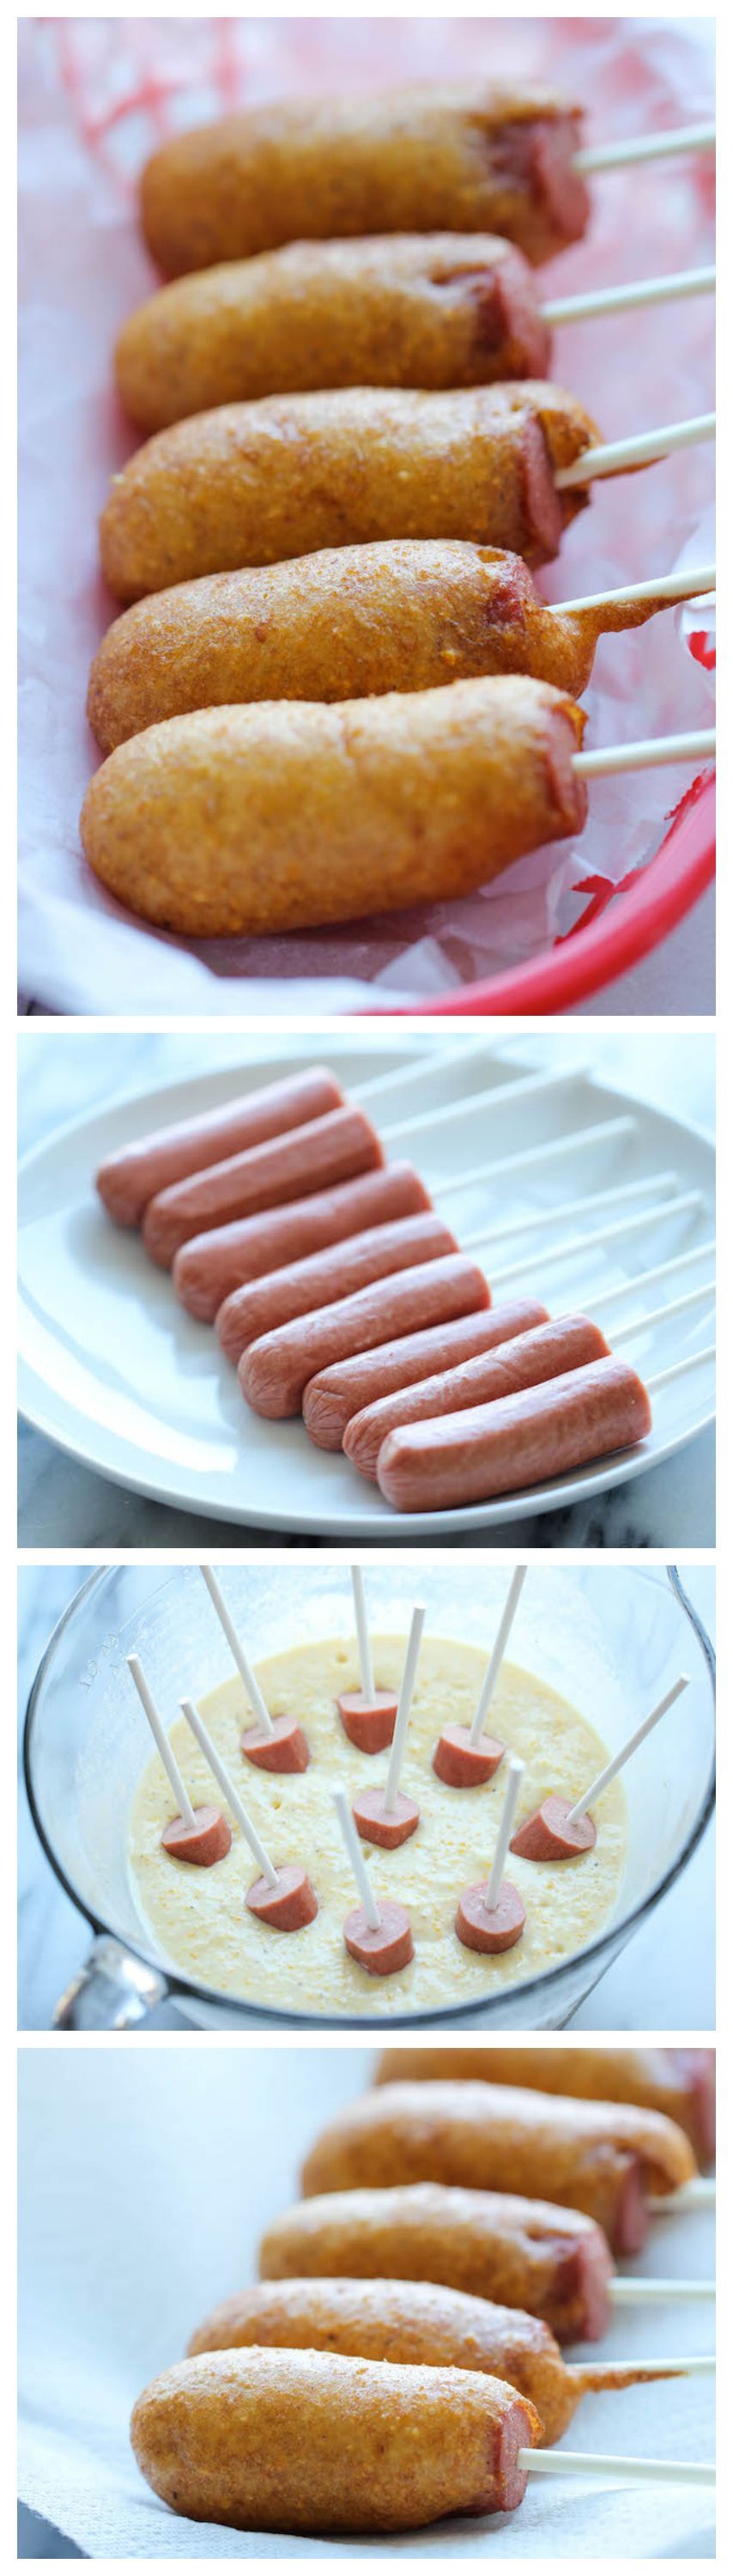 Easy Homemade Mini Corn Dogs – The easiest corn dogs you will ever make! Perfect as an after-school snack, game-day appetizer or